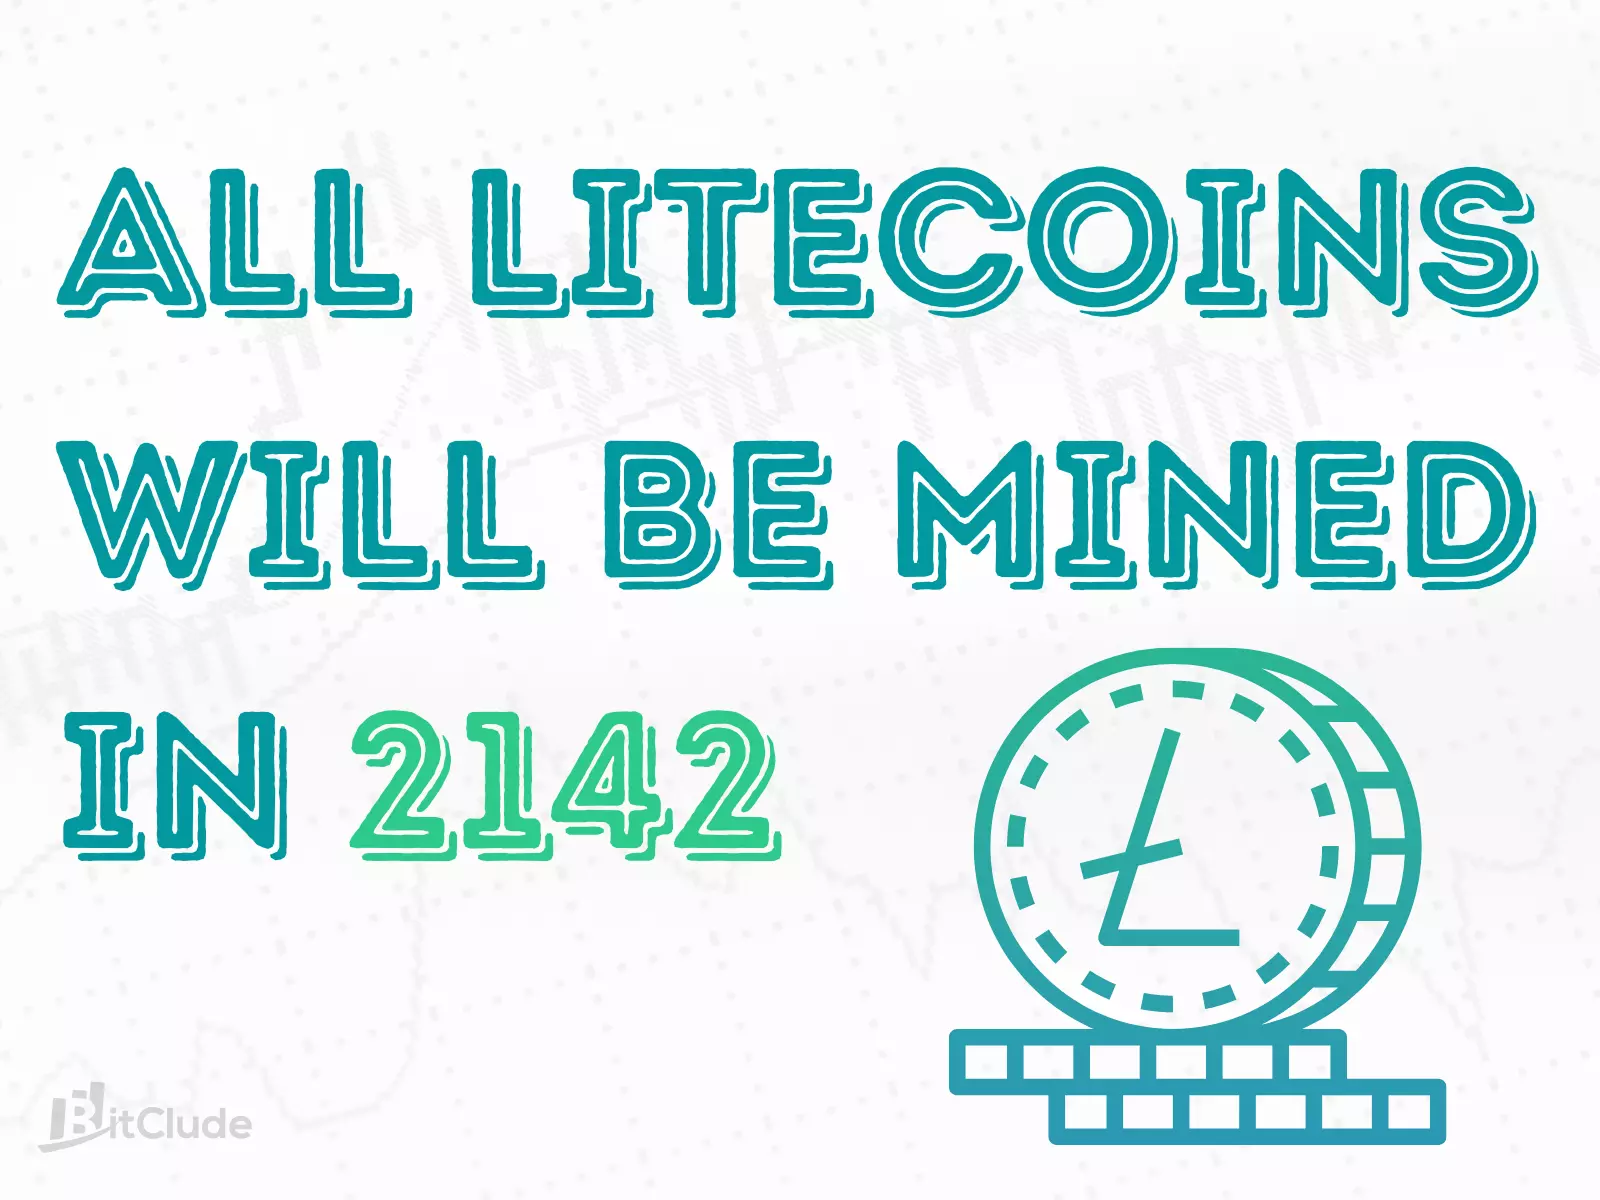 Mining of the litecoin will be finished till 2142